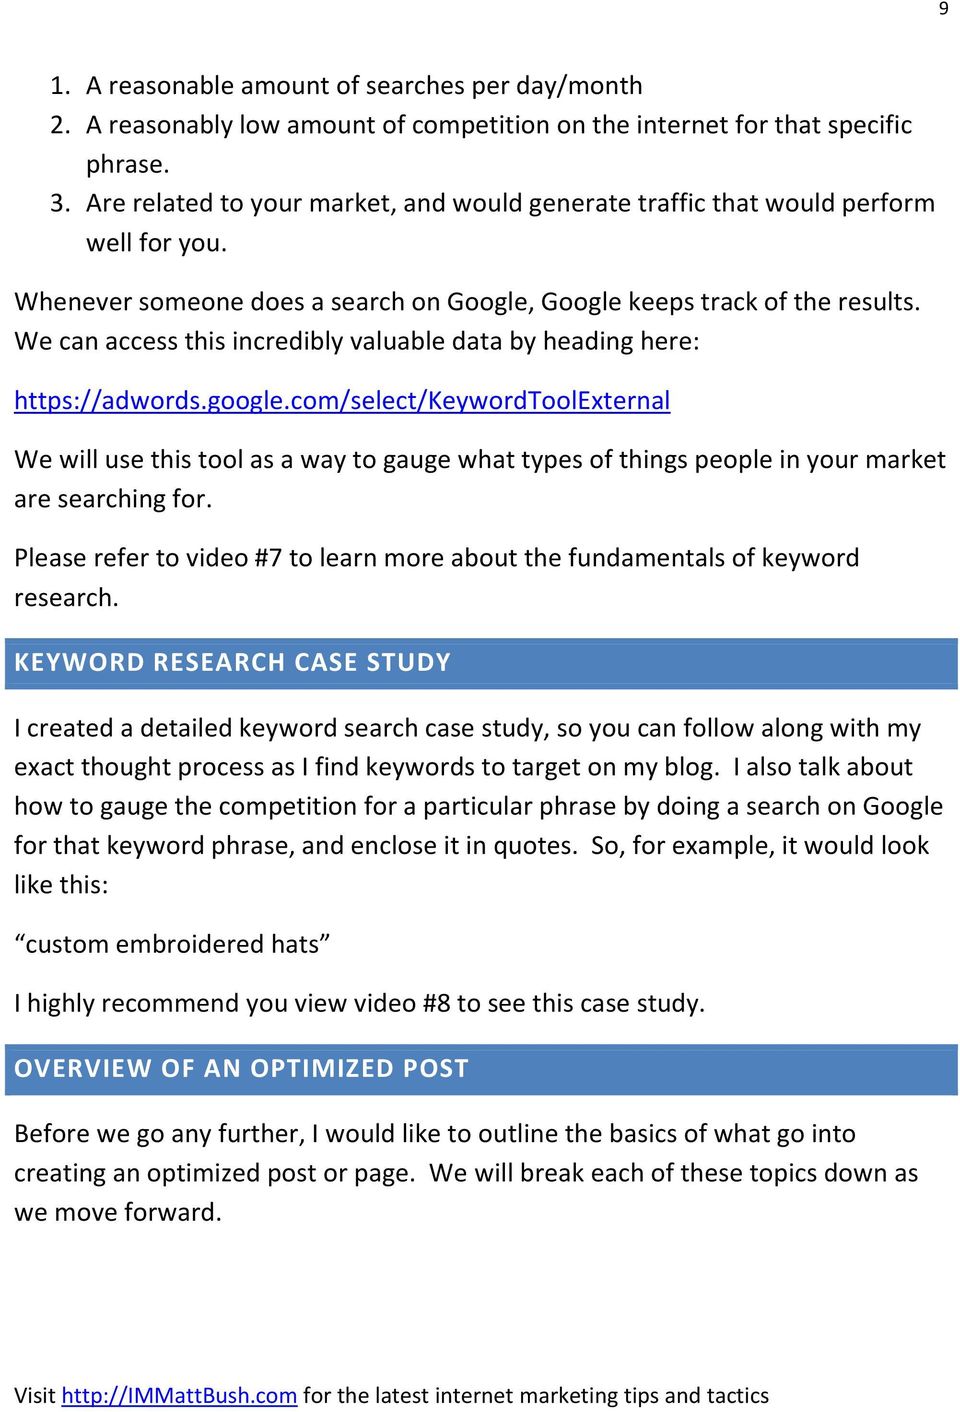 We can access this incredibly valuable data by heading here: https://adwords.google.